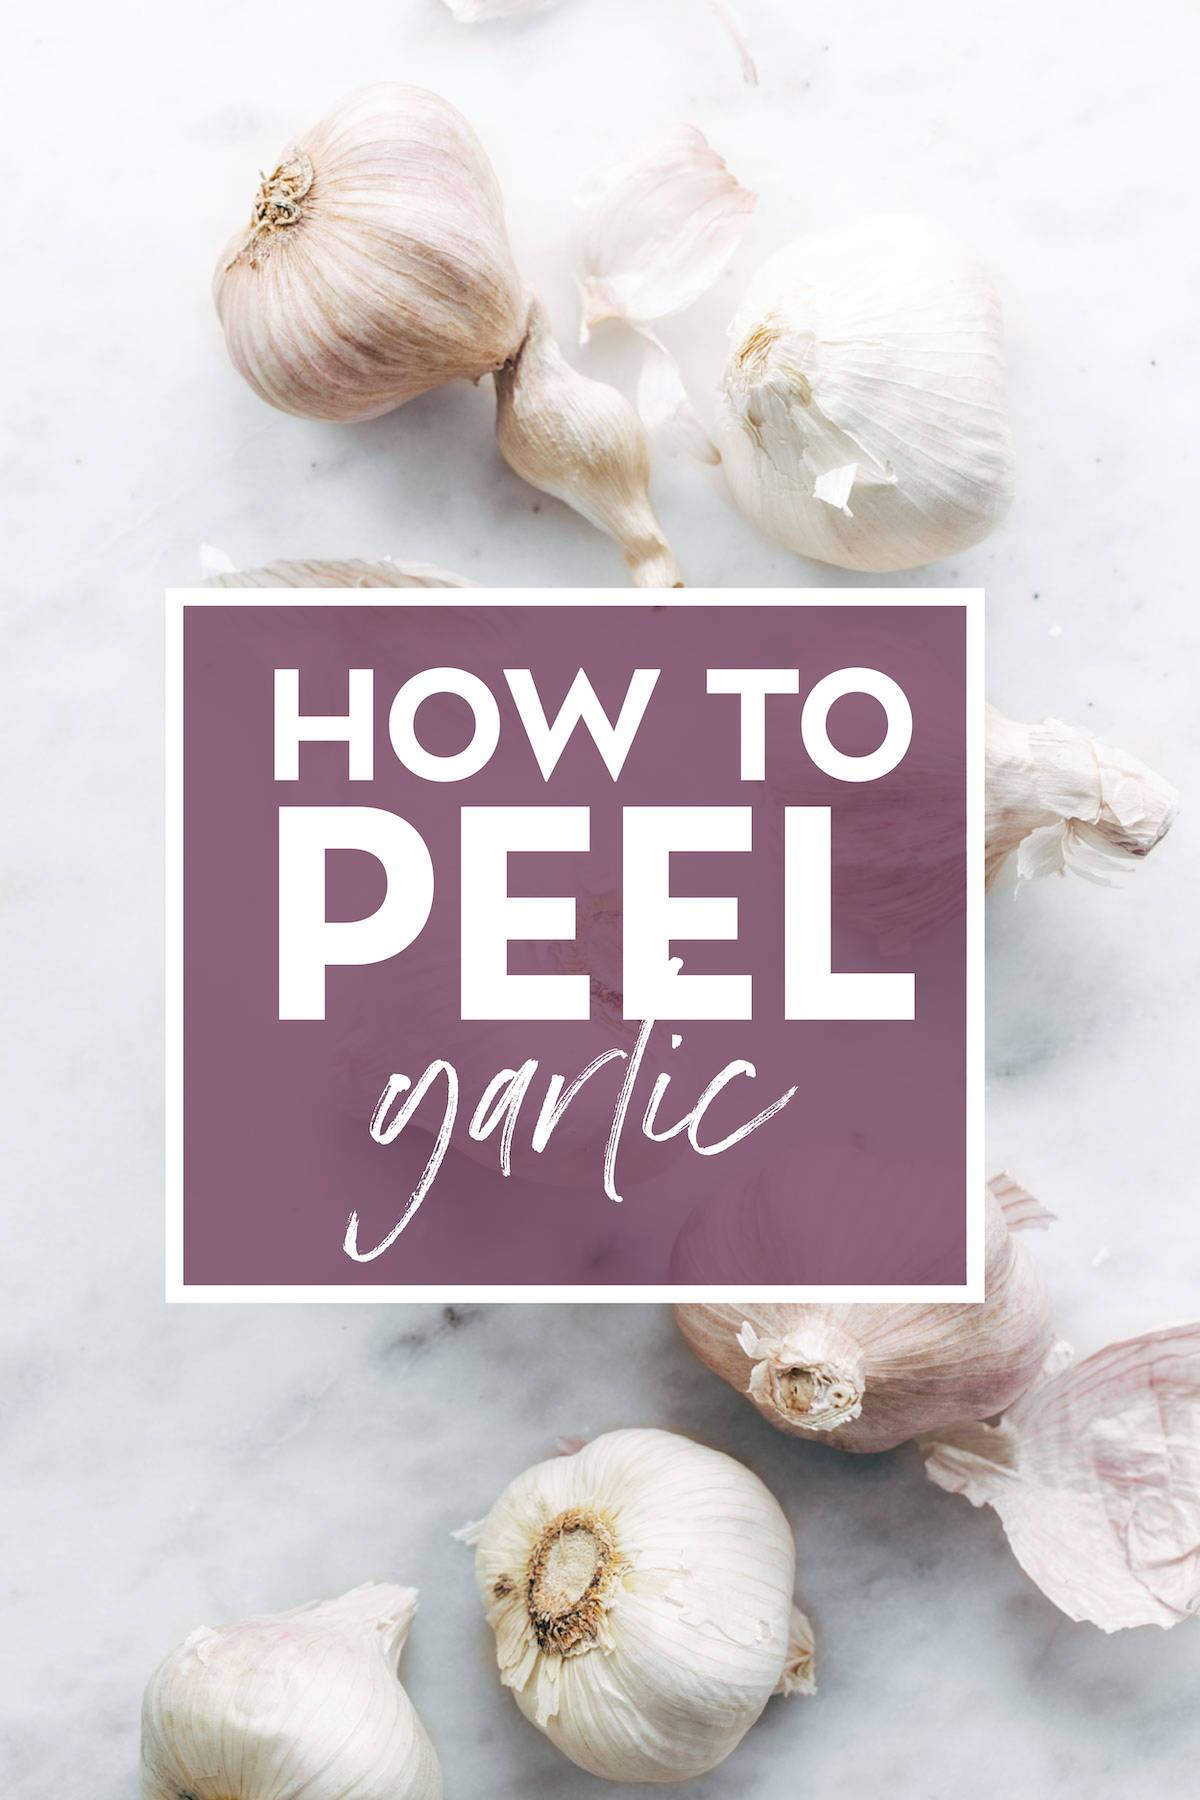 Few pieces of garlic with the heading "How to peel Garlic".